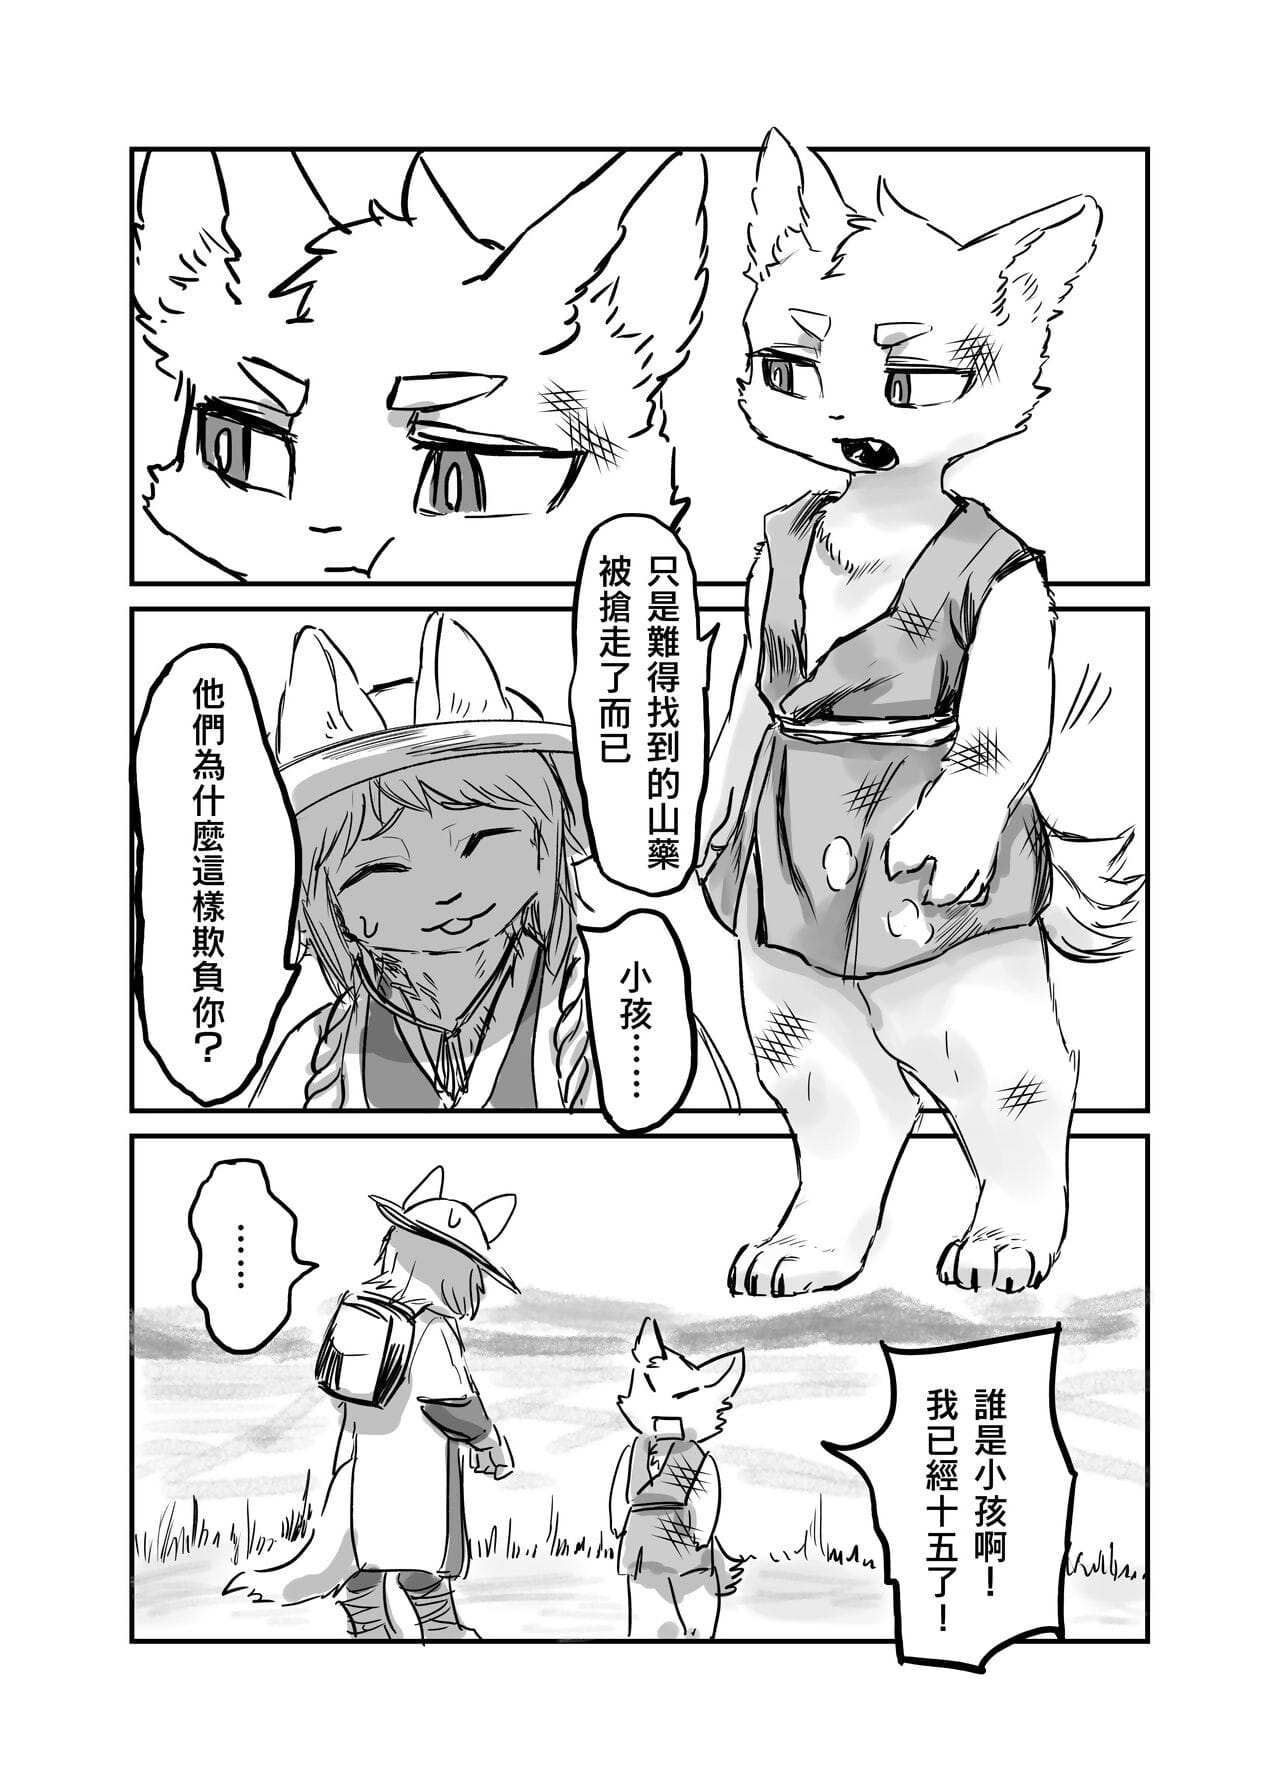 （the 방문자 他乡之人 by：鬼流 page 1